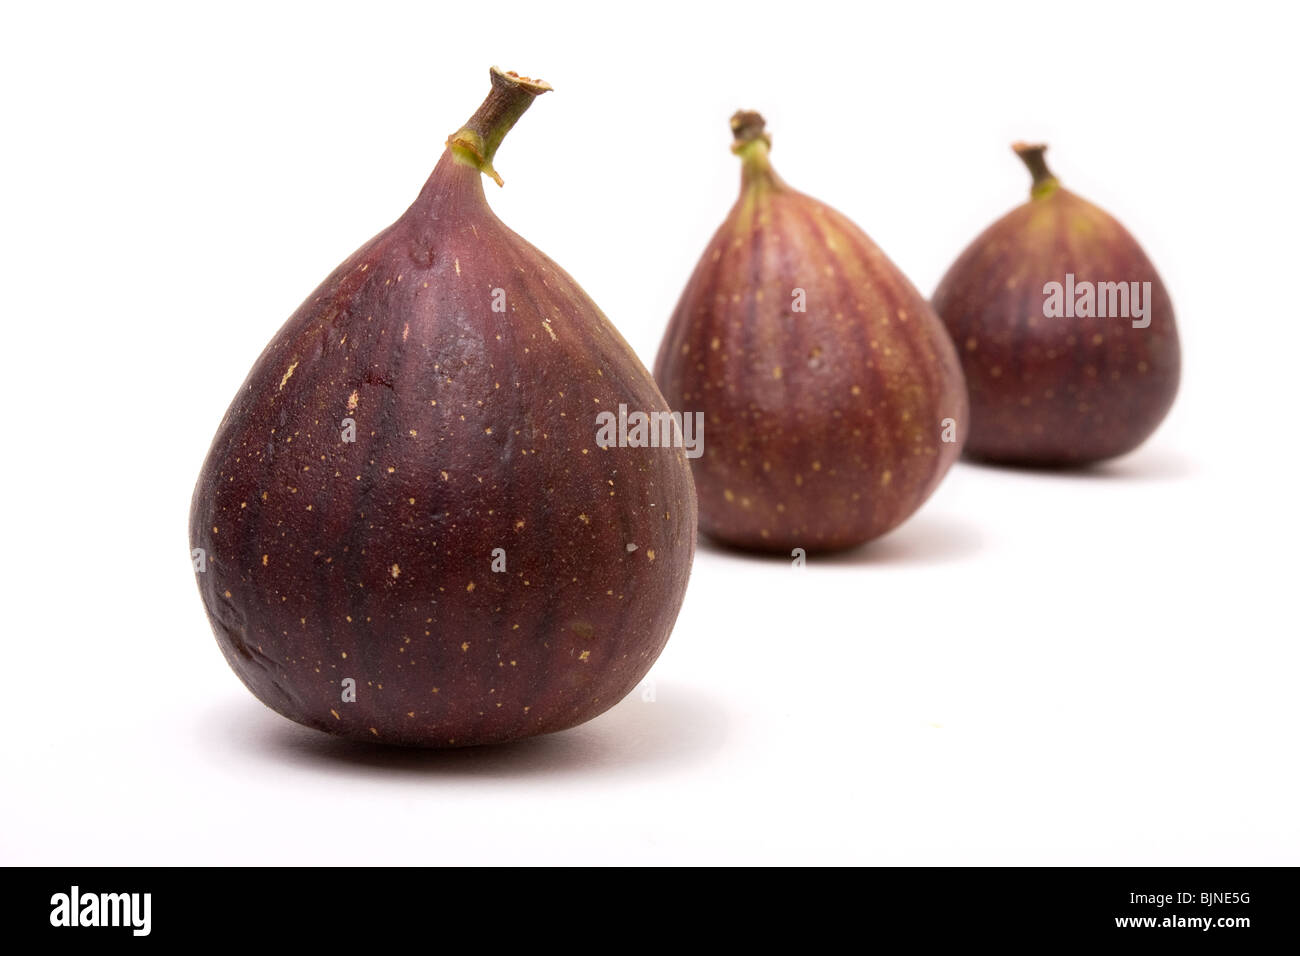 Abstract arrangement of Three ripe figs isolated against white background. Stock Photo